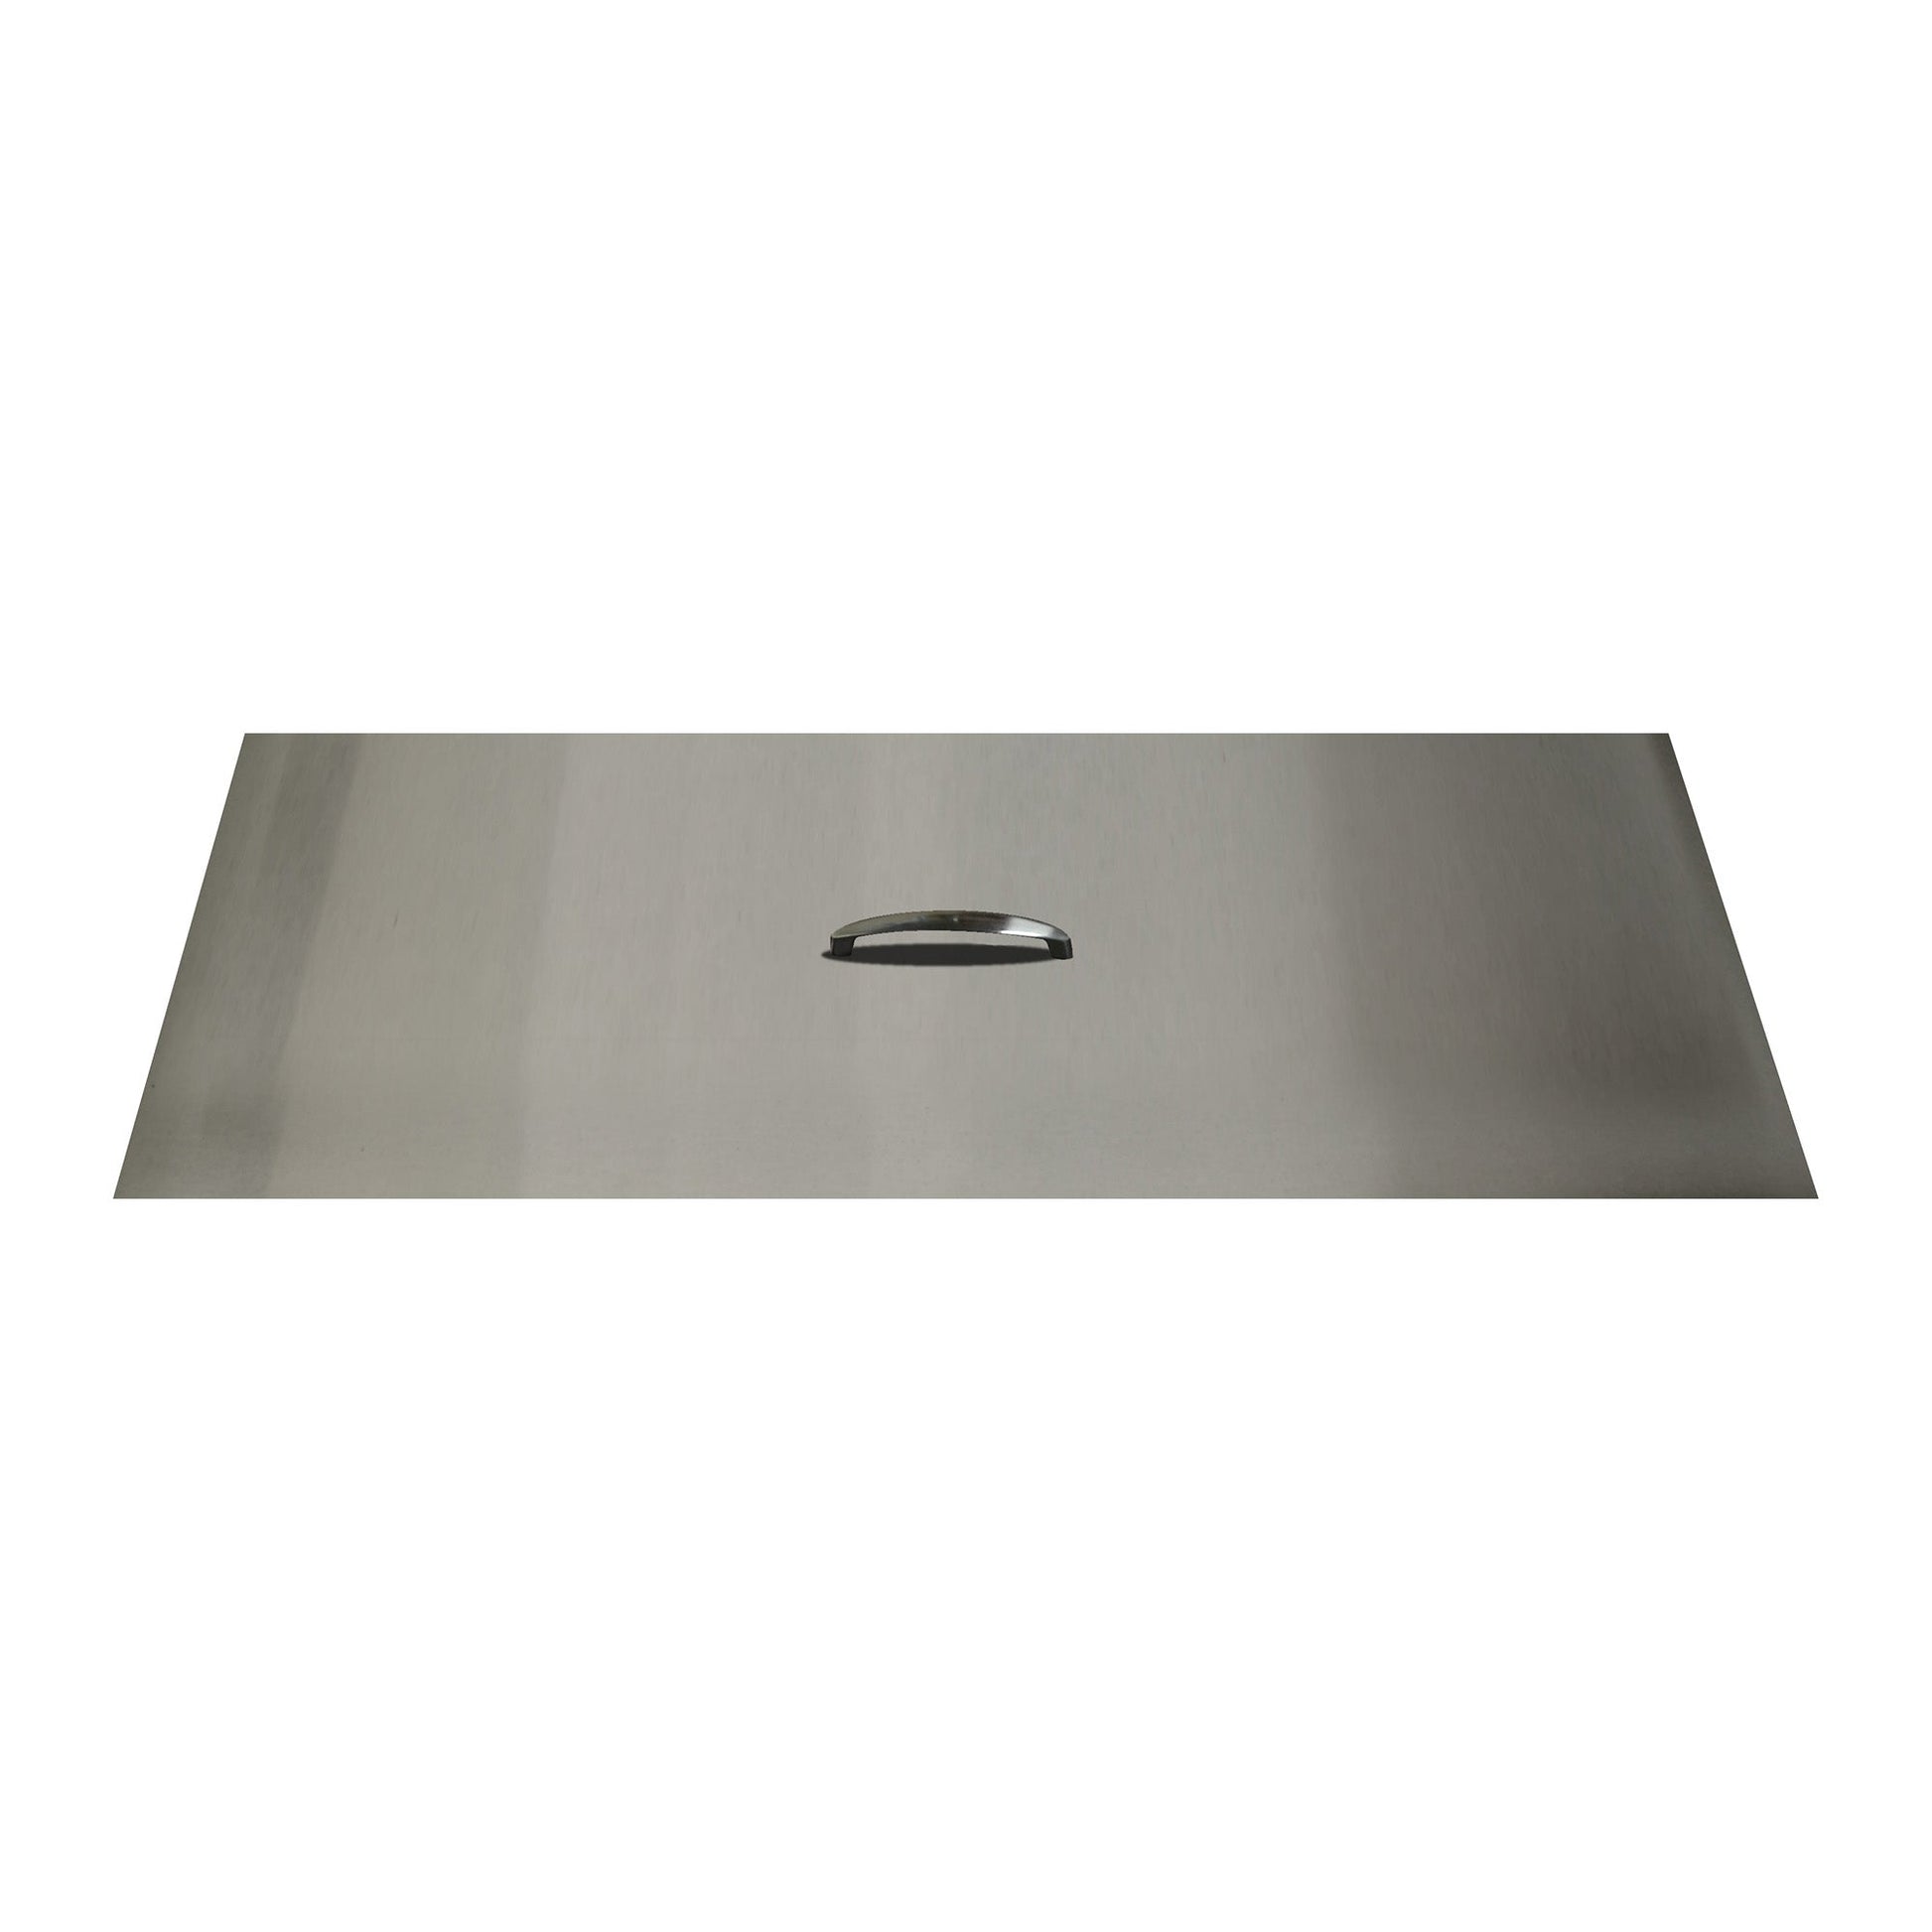 The Outdoor Plus 10" x 26" Stainless Steel Rectangular Fire Pit Lid Cover